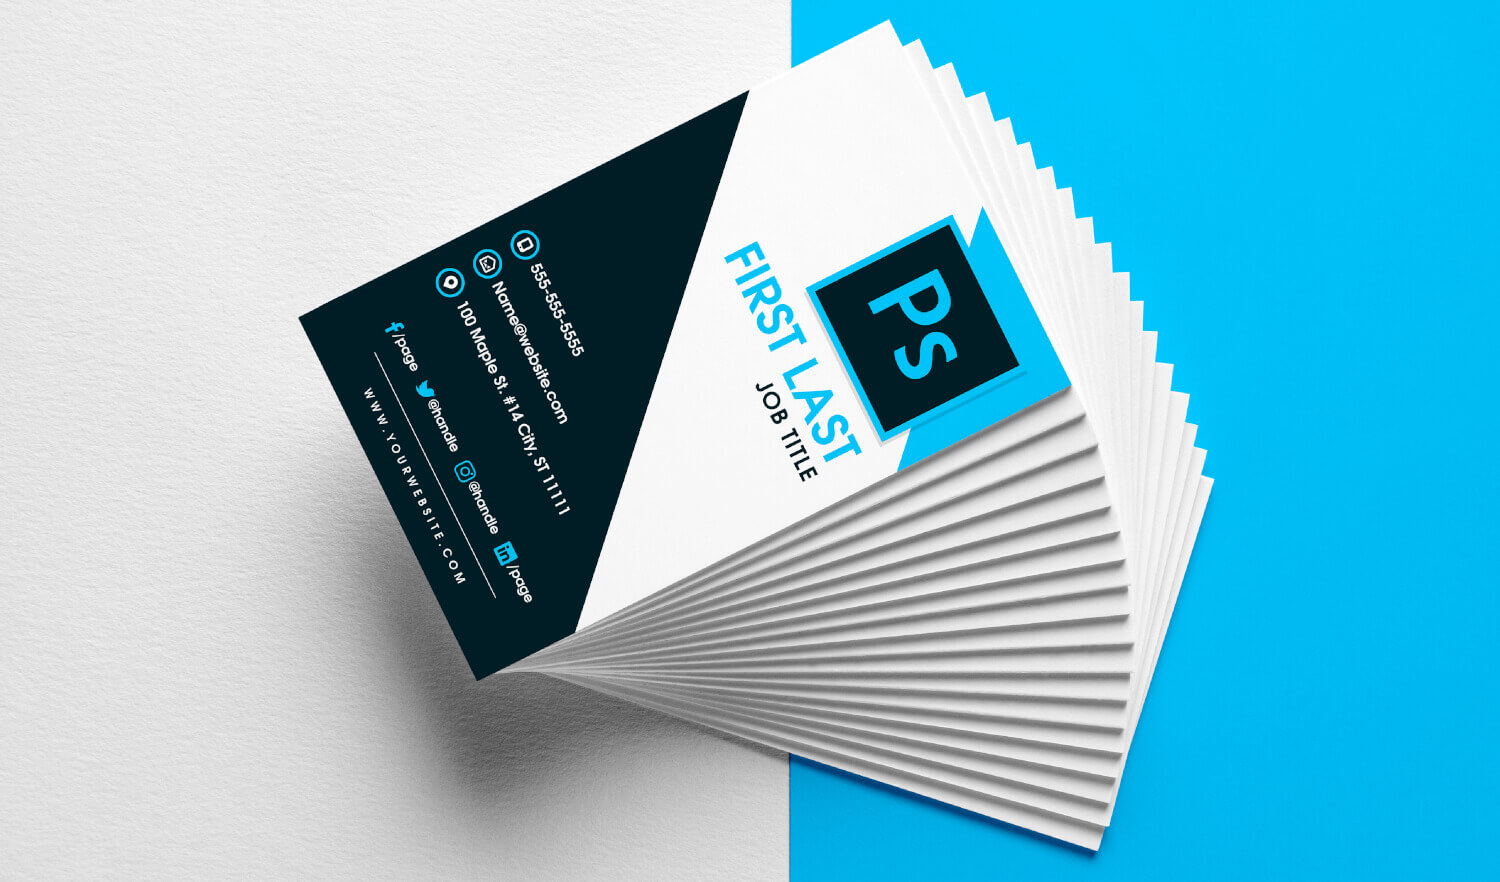 Free Vertical Business Card Template In Psd Format In Free Business Card Templates In Psd Format